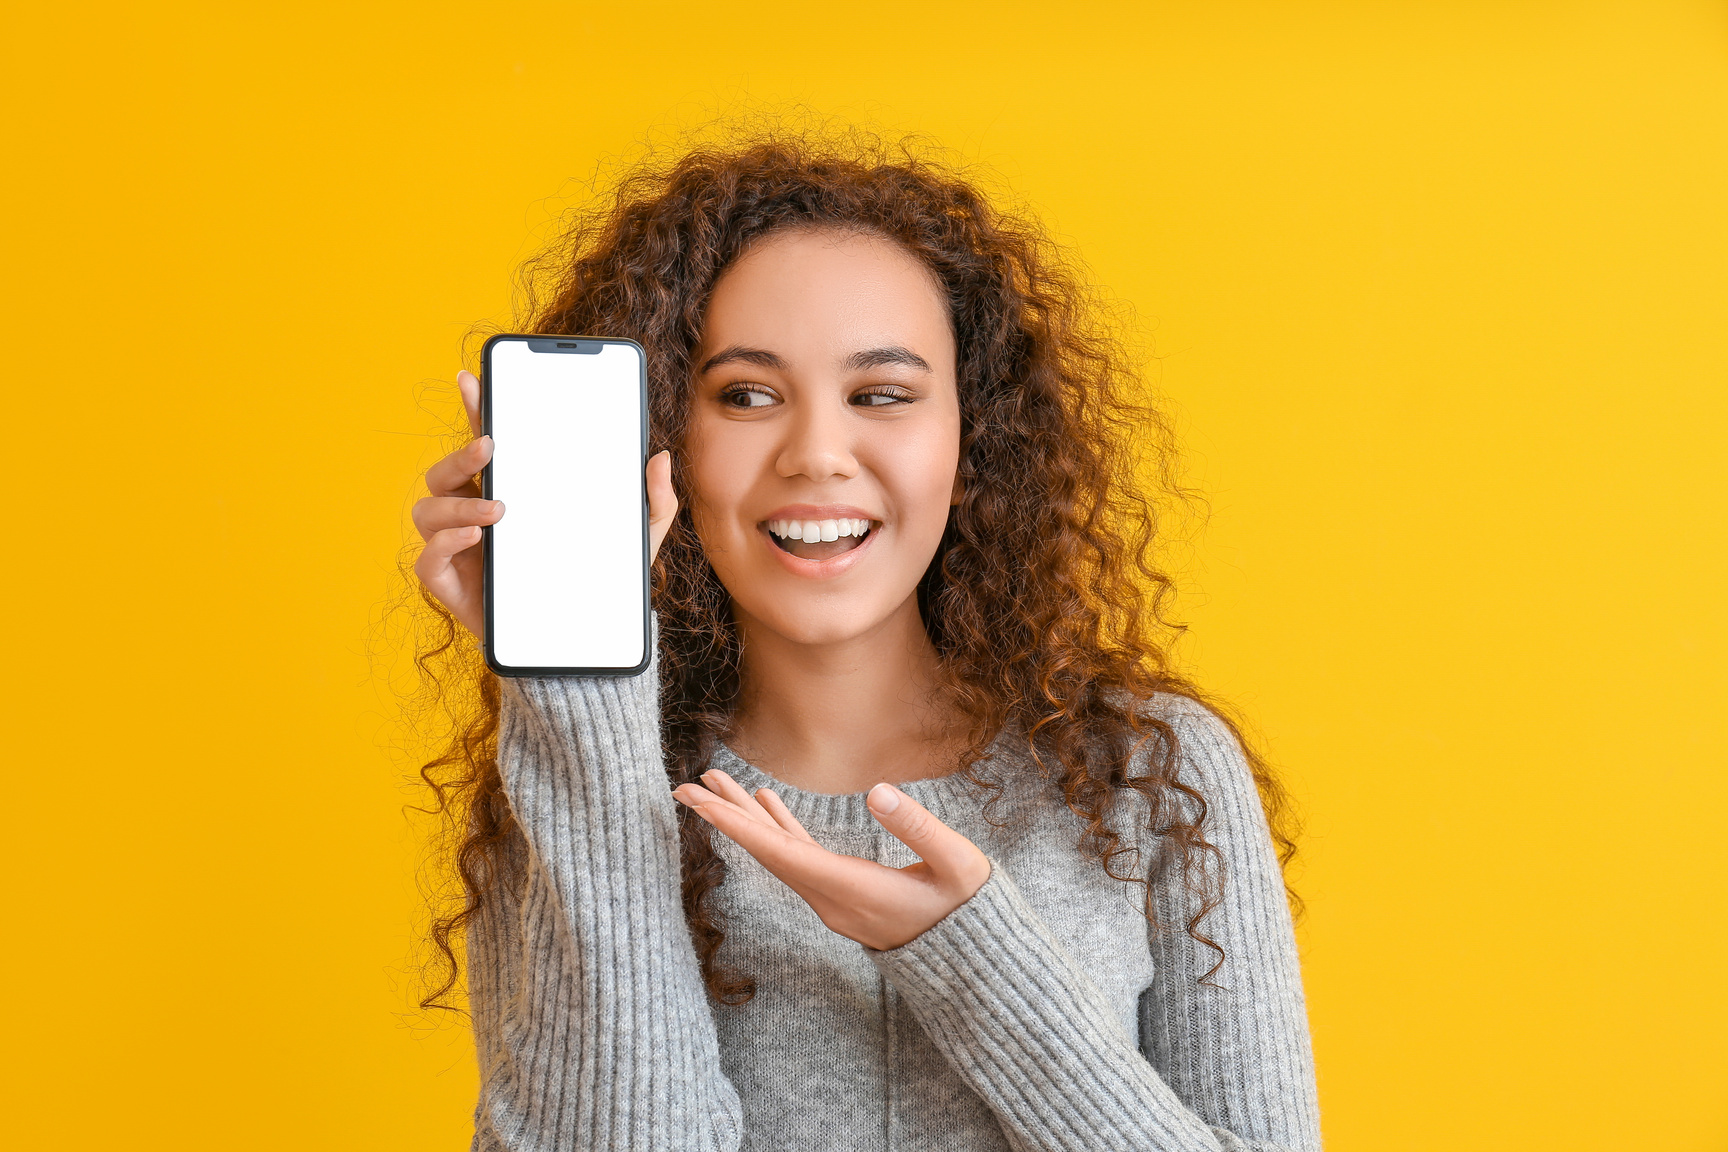 Woman Showing Mobile Phone on Orange Background